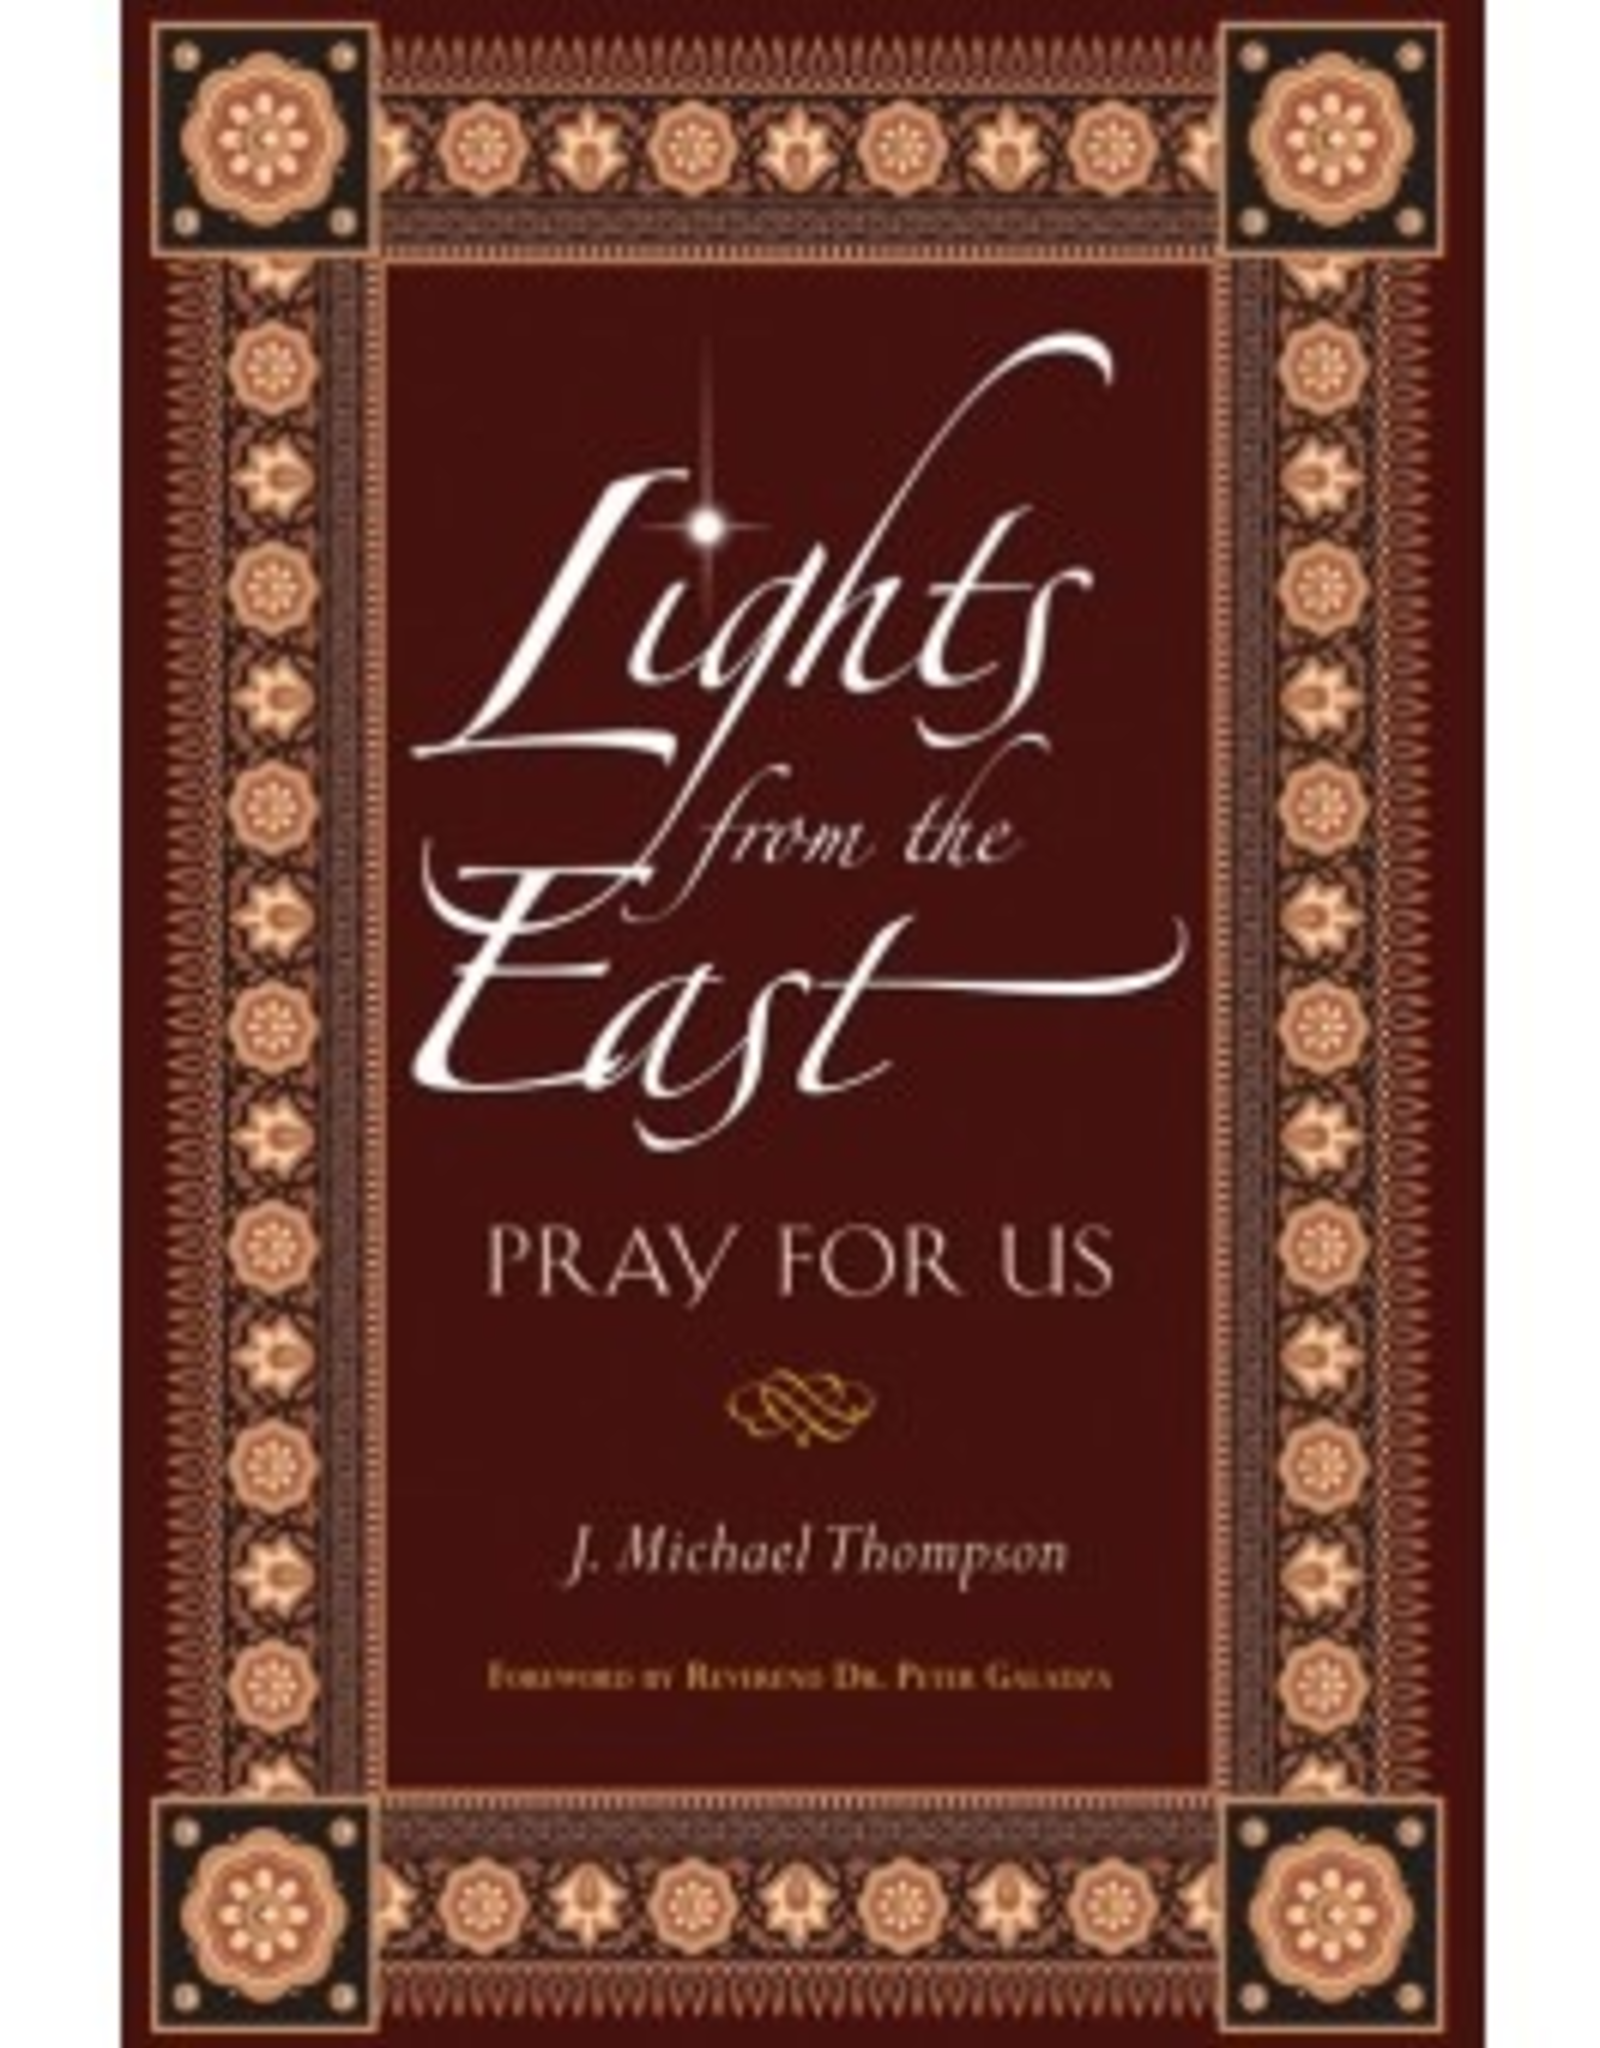 Liguori Press Lights from the East, by J. Michael Thompson (paperback)